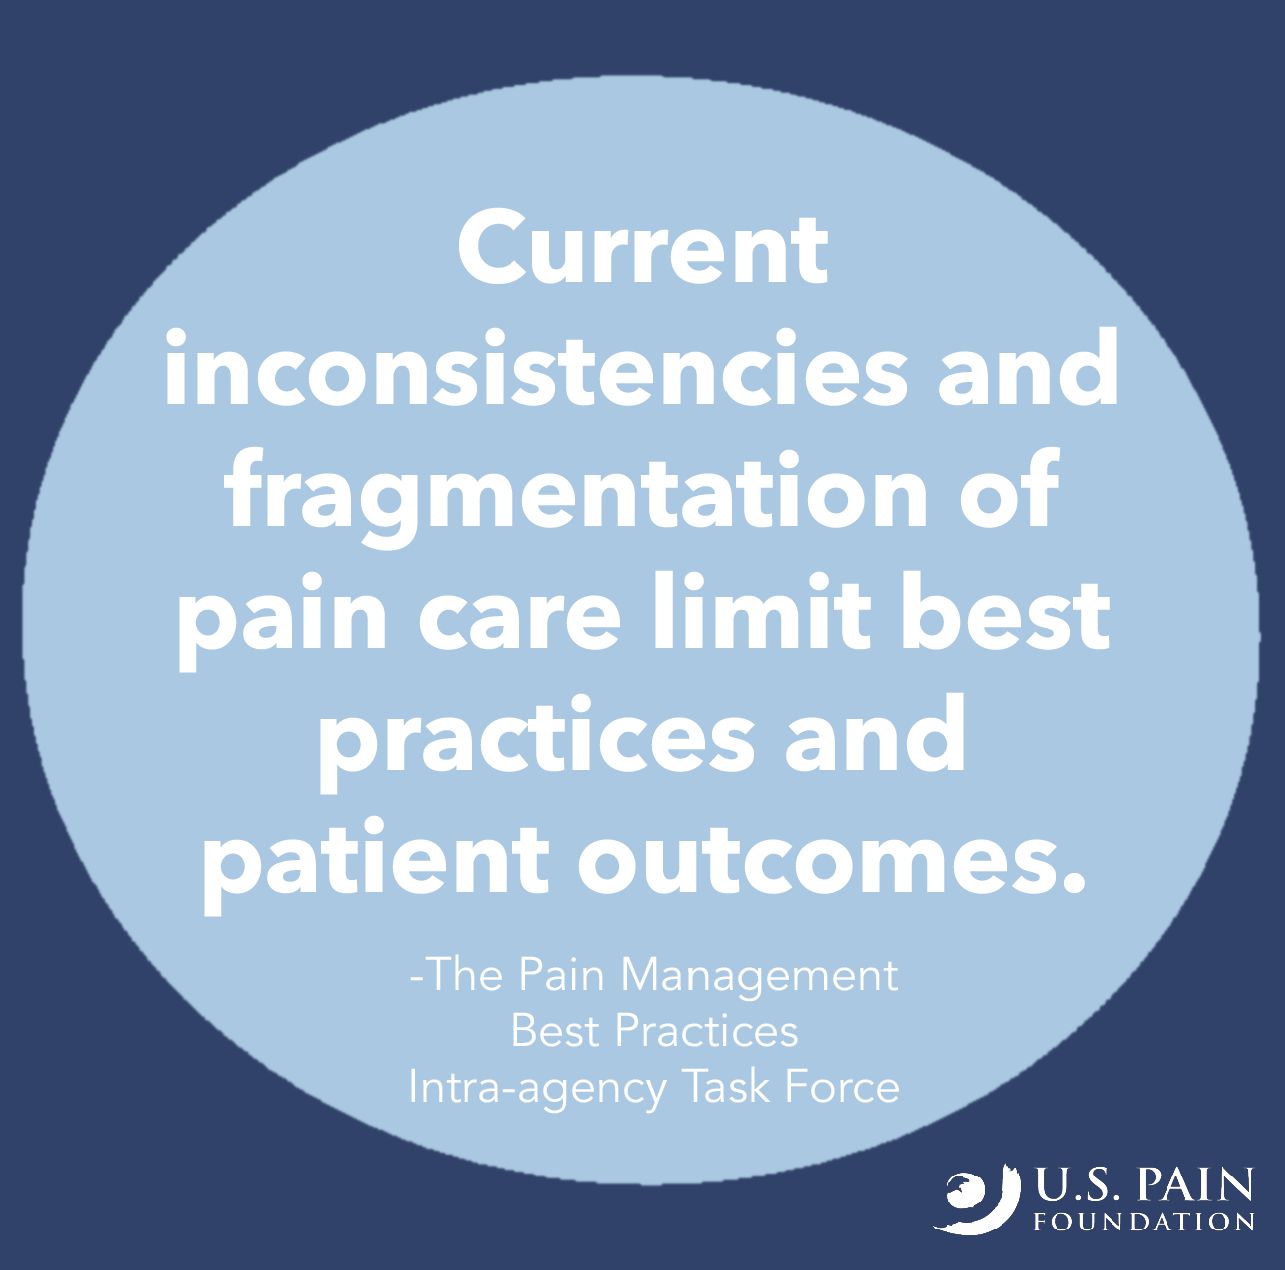 One month left to comment on federal recommendations on pain